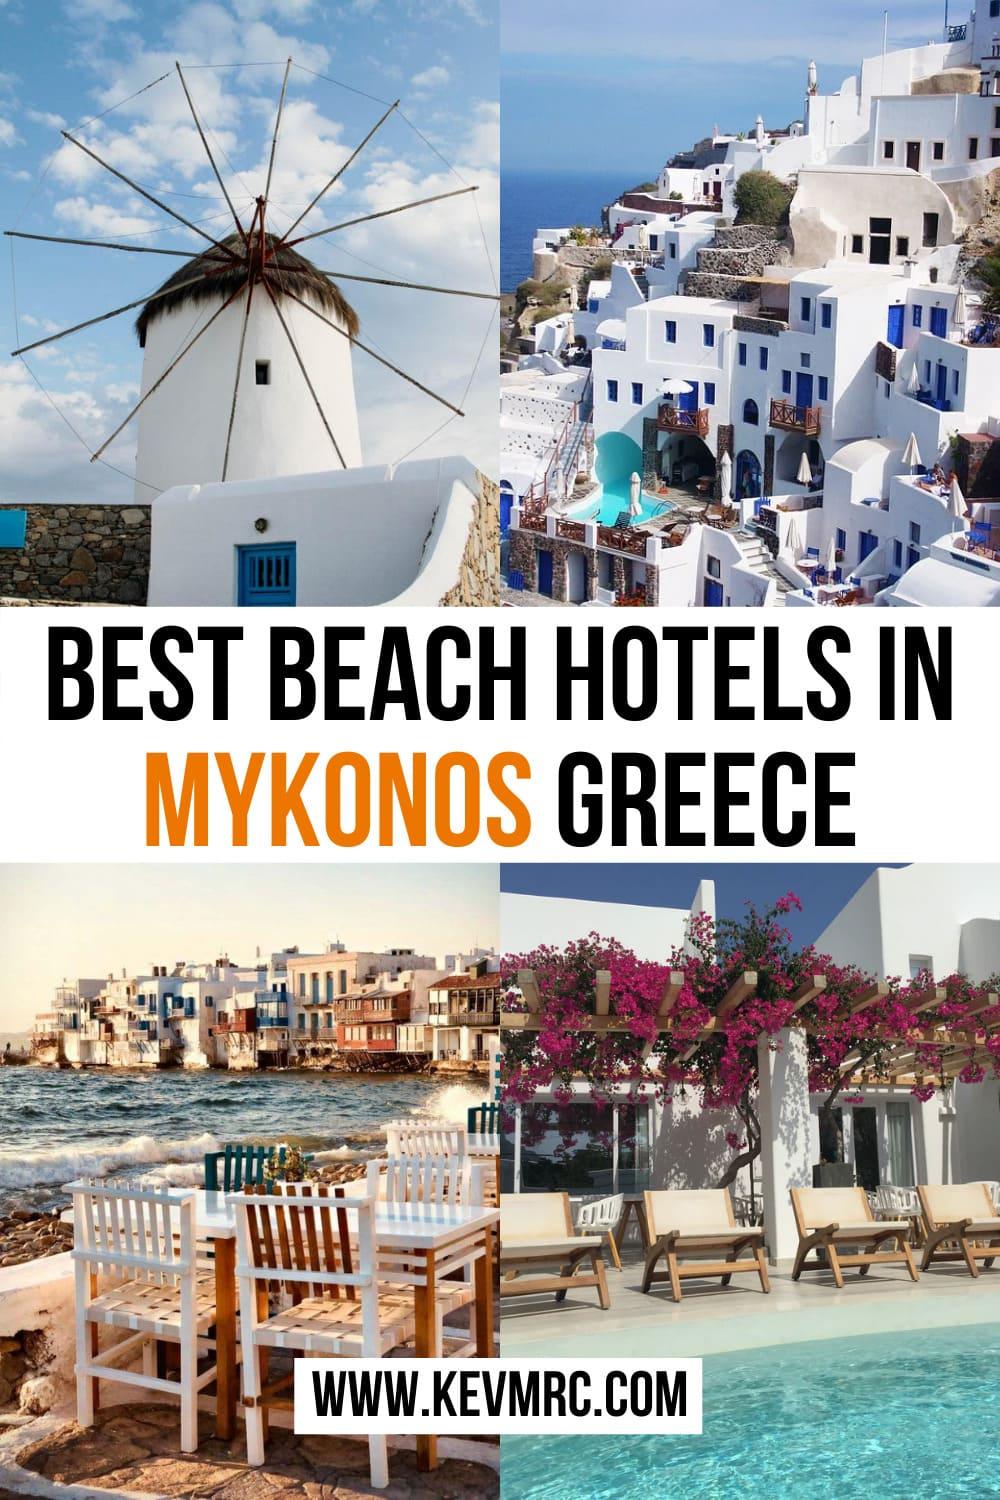 The problem you might face now is choosing the right hotel on the beach in Mykonos, since there are so many and most are close, but not directly on the beach. Luckily for you, I’ve done this part of the work to help through this: I’ve selected the 17 best Mykonos beach hotels in this guide. mykonos beach hotel | beach hotels in mykonos | best mykonos hotels | mykonos guide